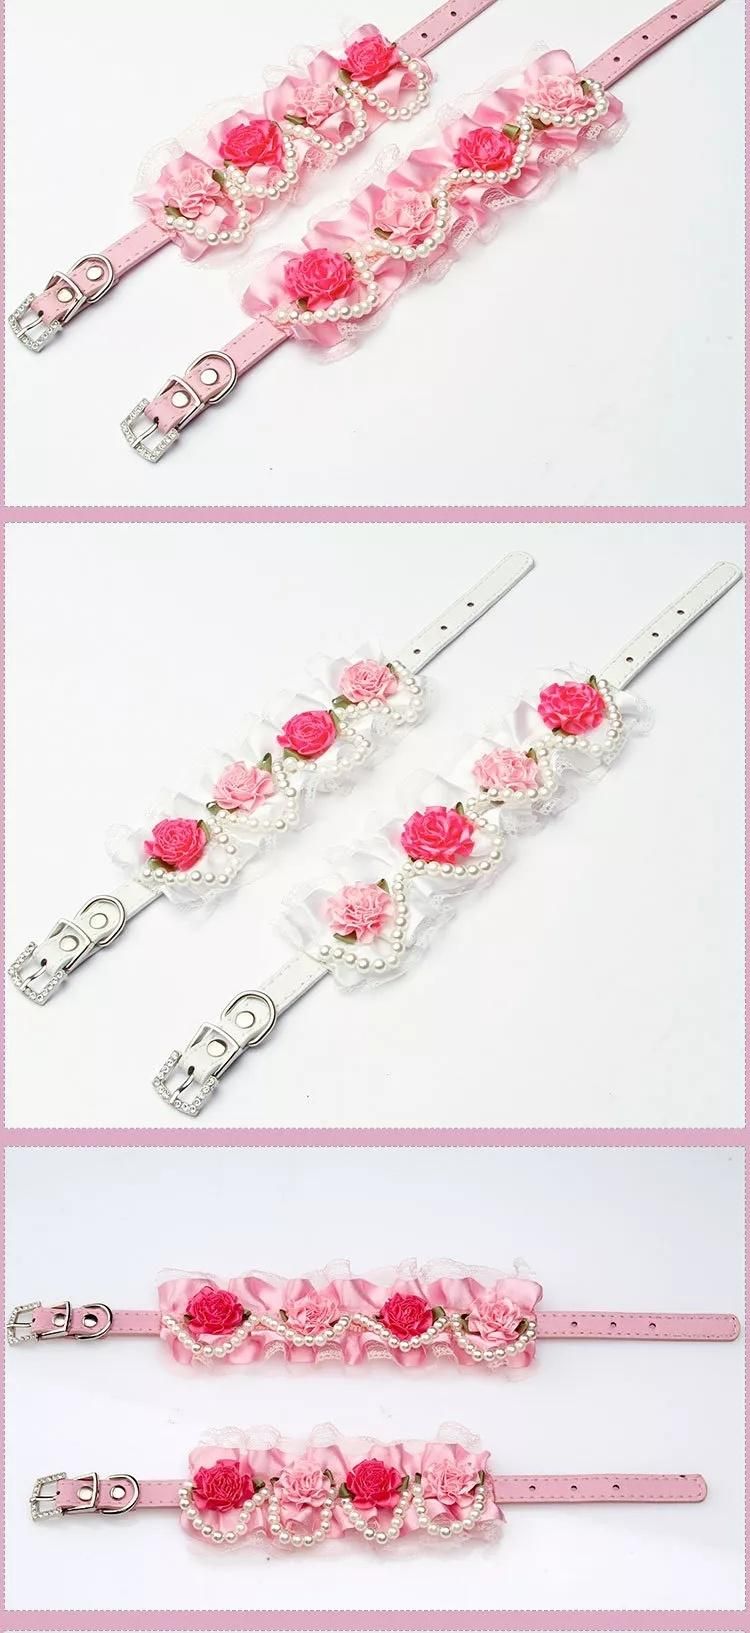 Flower Lace Pearl Designers PU Leather Dog Collar Pink Cat Collar Necklace Pet Accessories Supplies